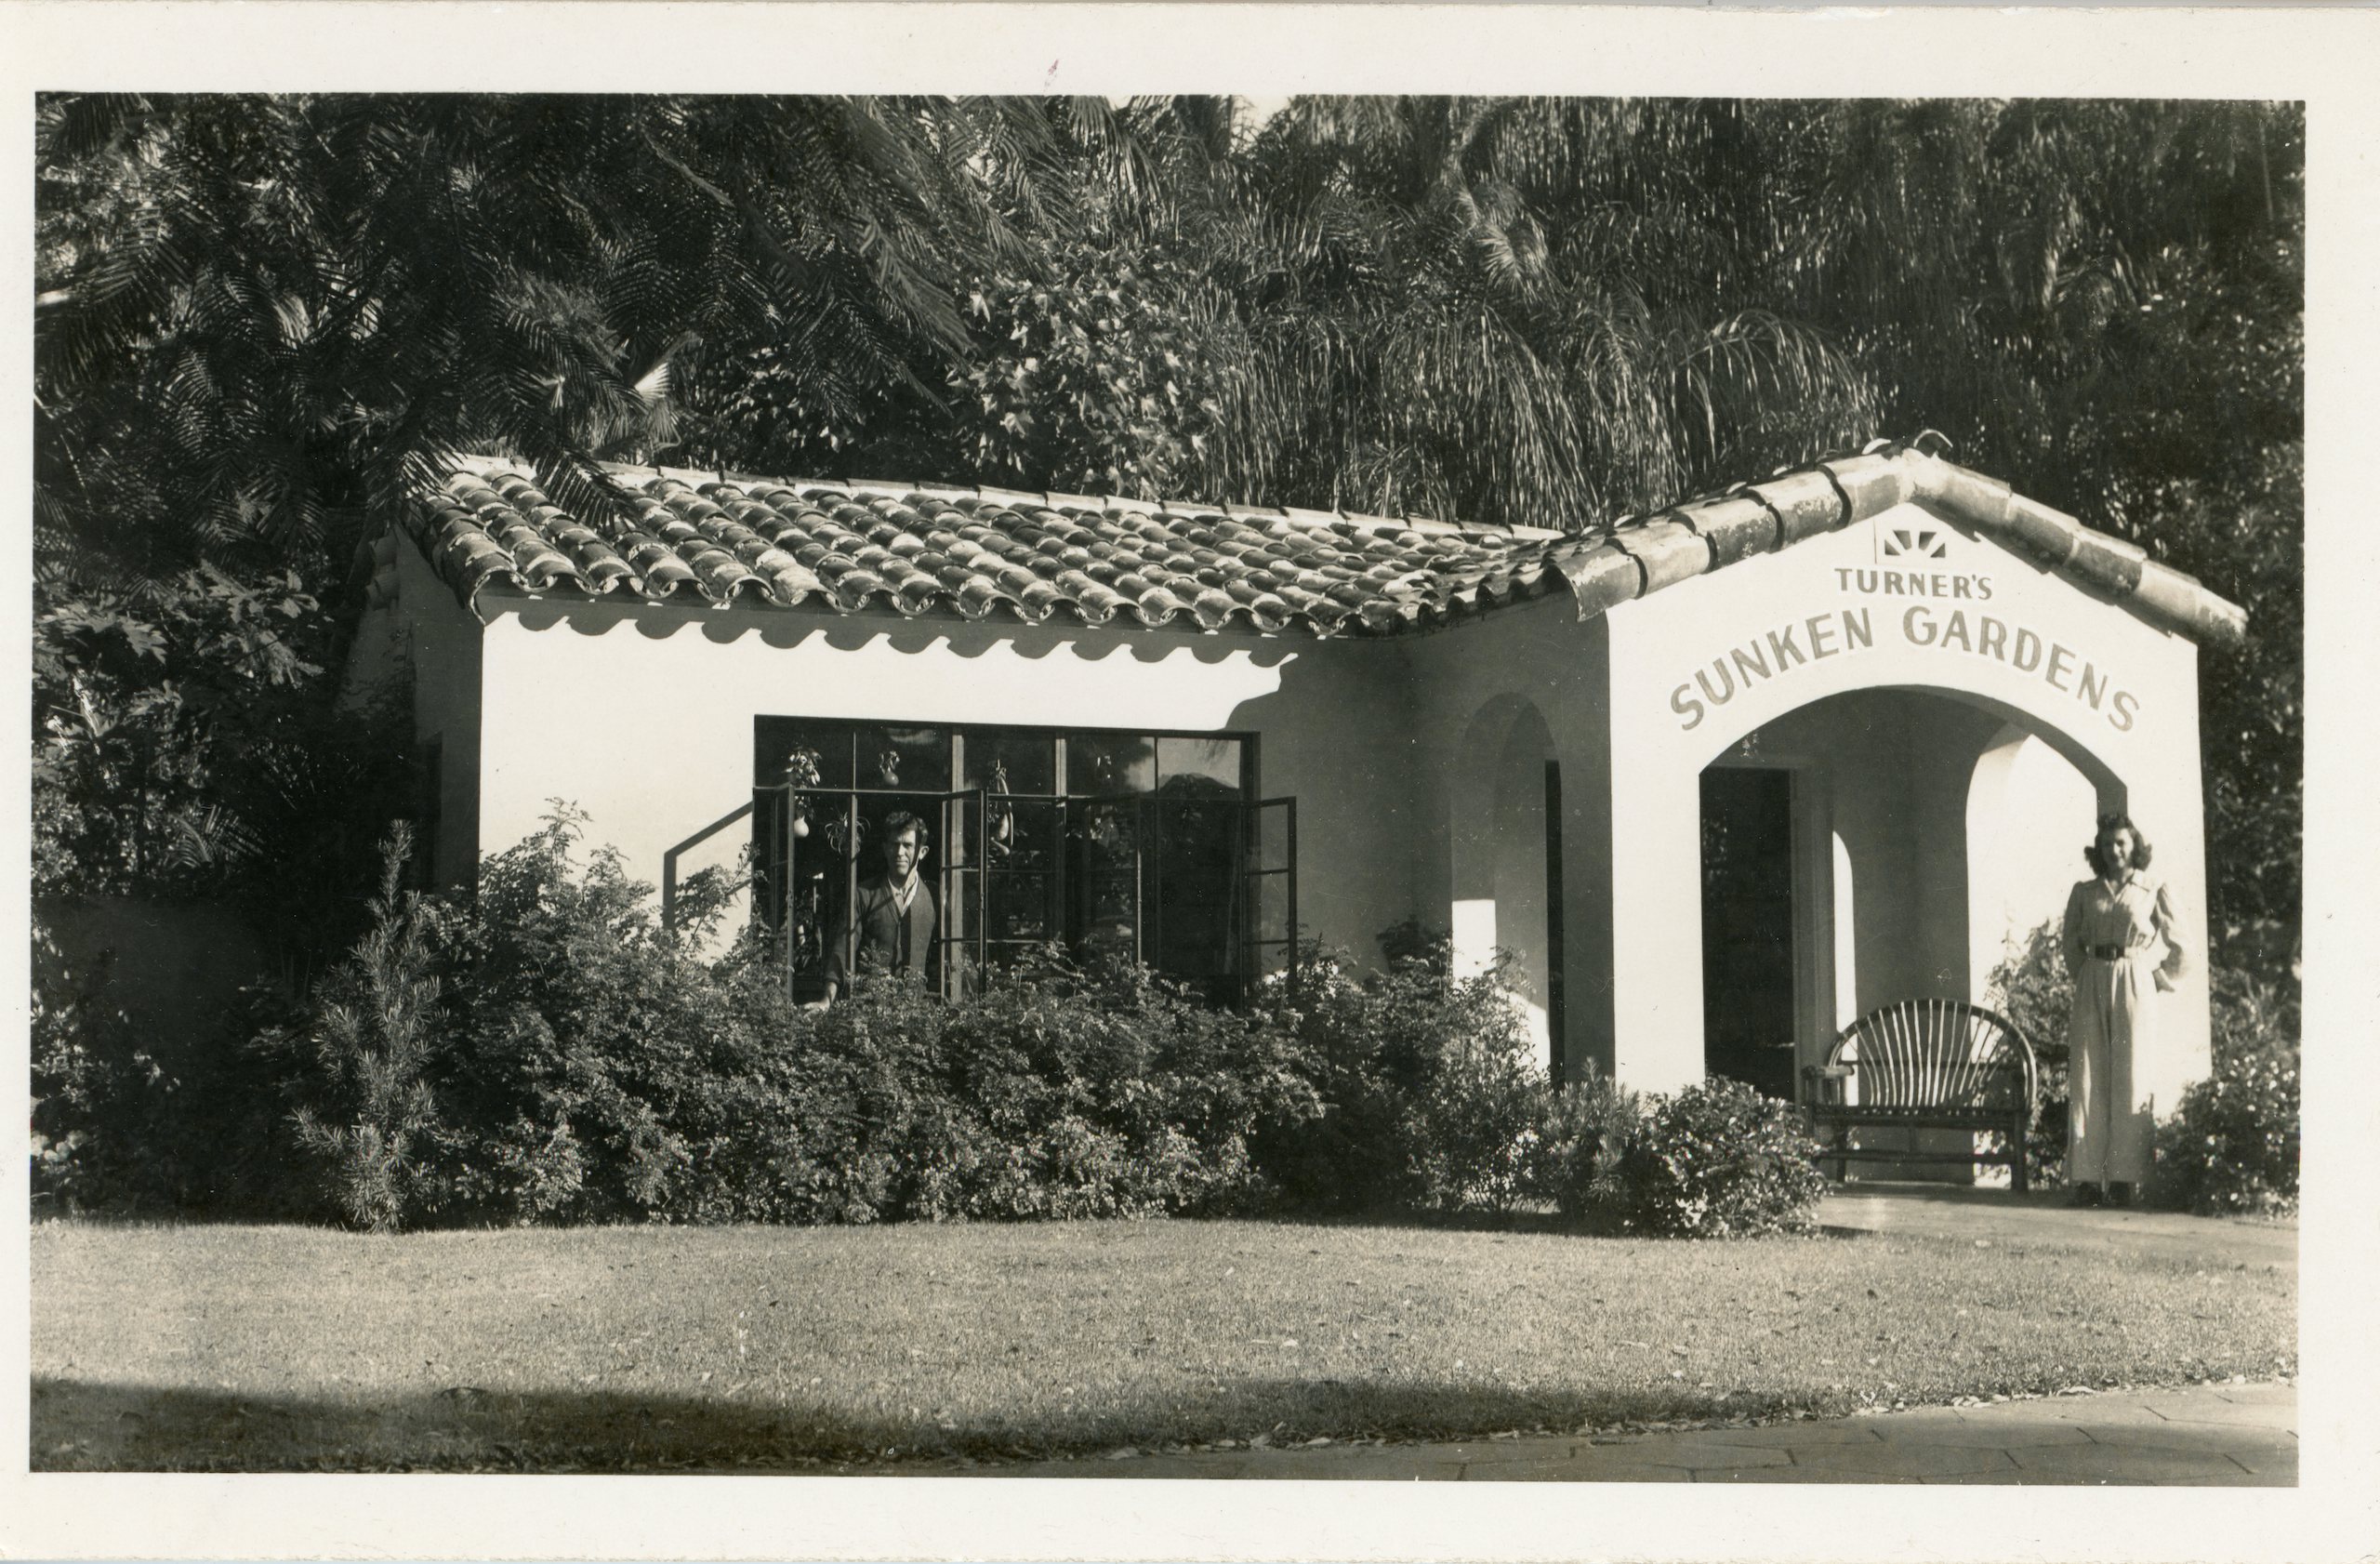 black and white photo of outside of Sunken Gardens entrance from the 1920s